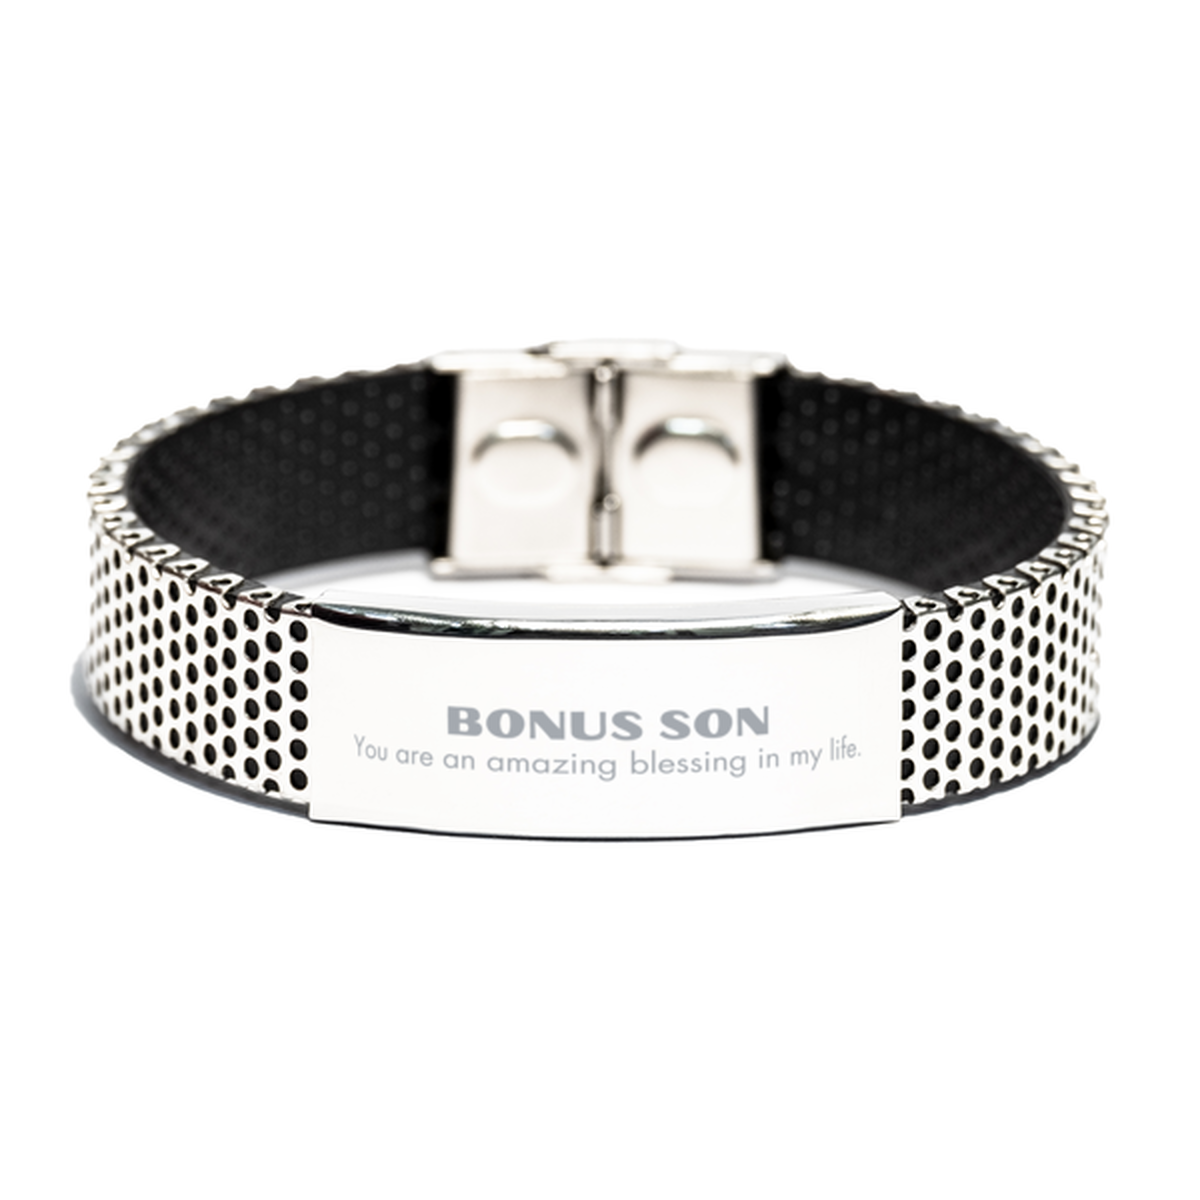 Bonus Son Stainless Steel Bracelet, You are an amazing blessing in my life, Thank You Gifts For Bonus Son, Inspirational Birthday Christmas Unique Gifts For Bonus Son